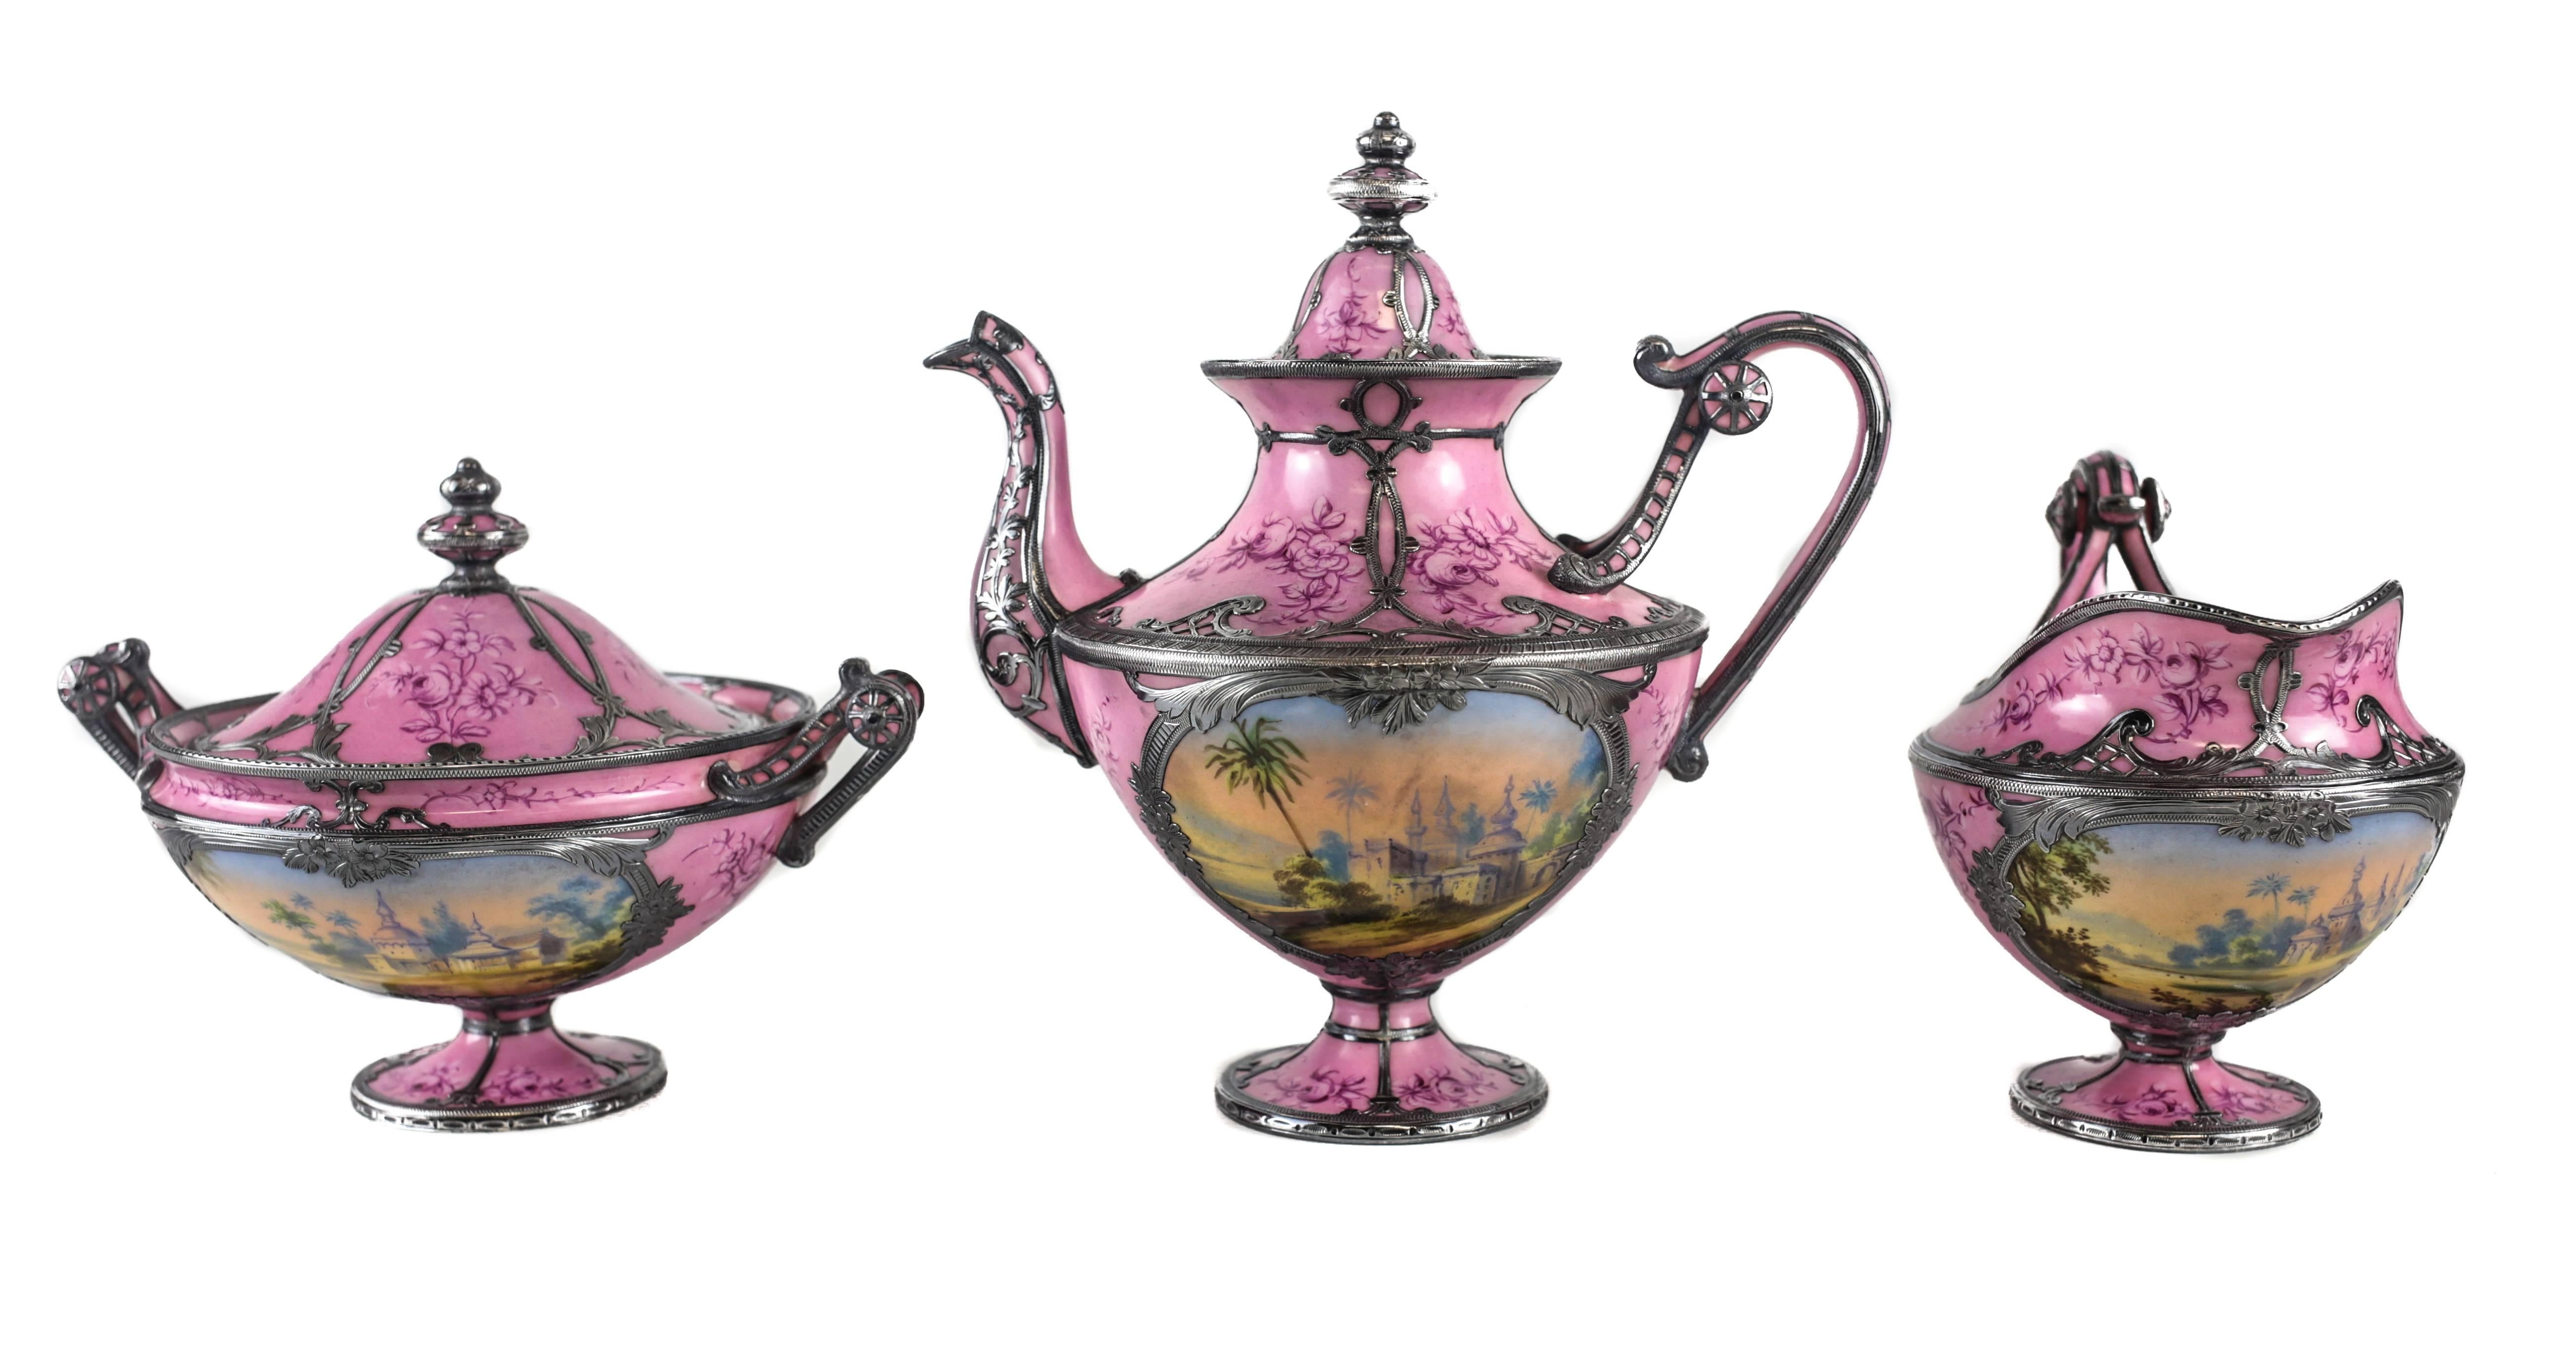 An exceptional French porcelain tête-à-tête (tea service for two) in the Sevres style with a rose pink ground and the finest hand etched silver overlay. The hand-painted topographical scenes depict a royal Arabian oasis with lush greens and a